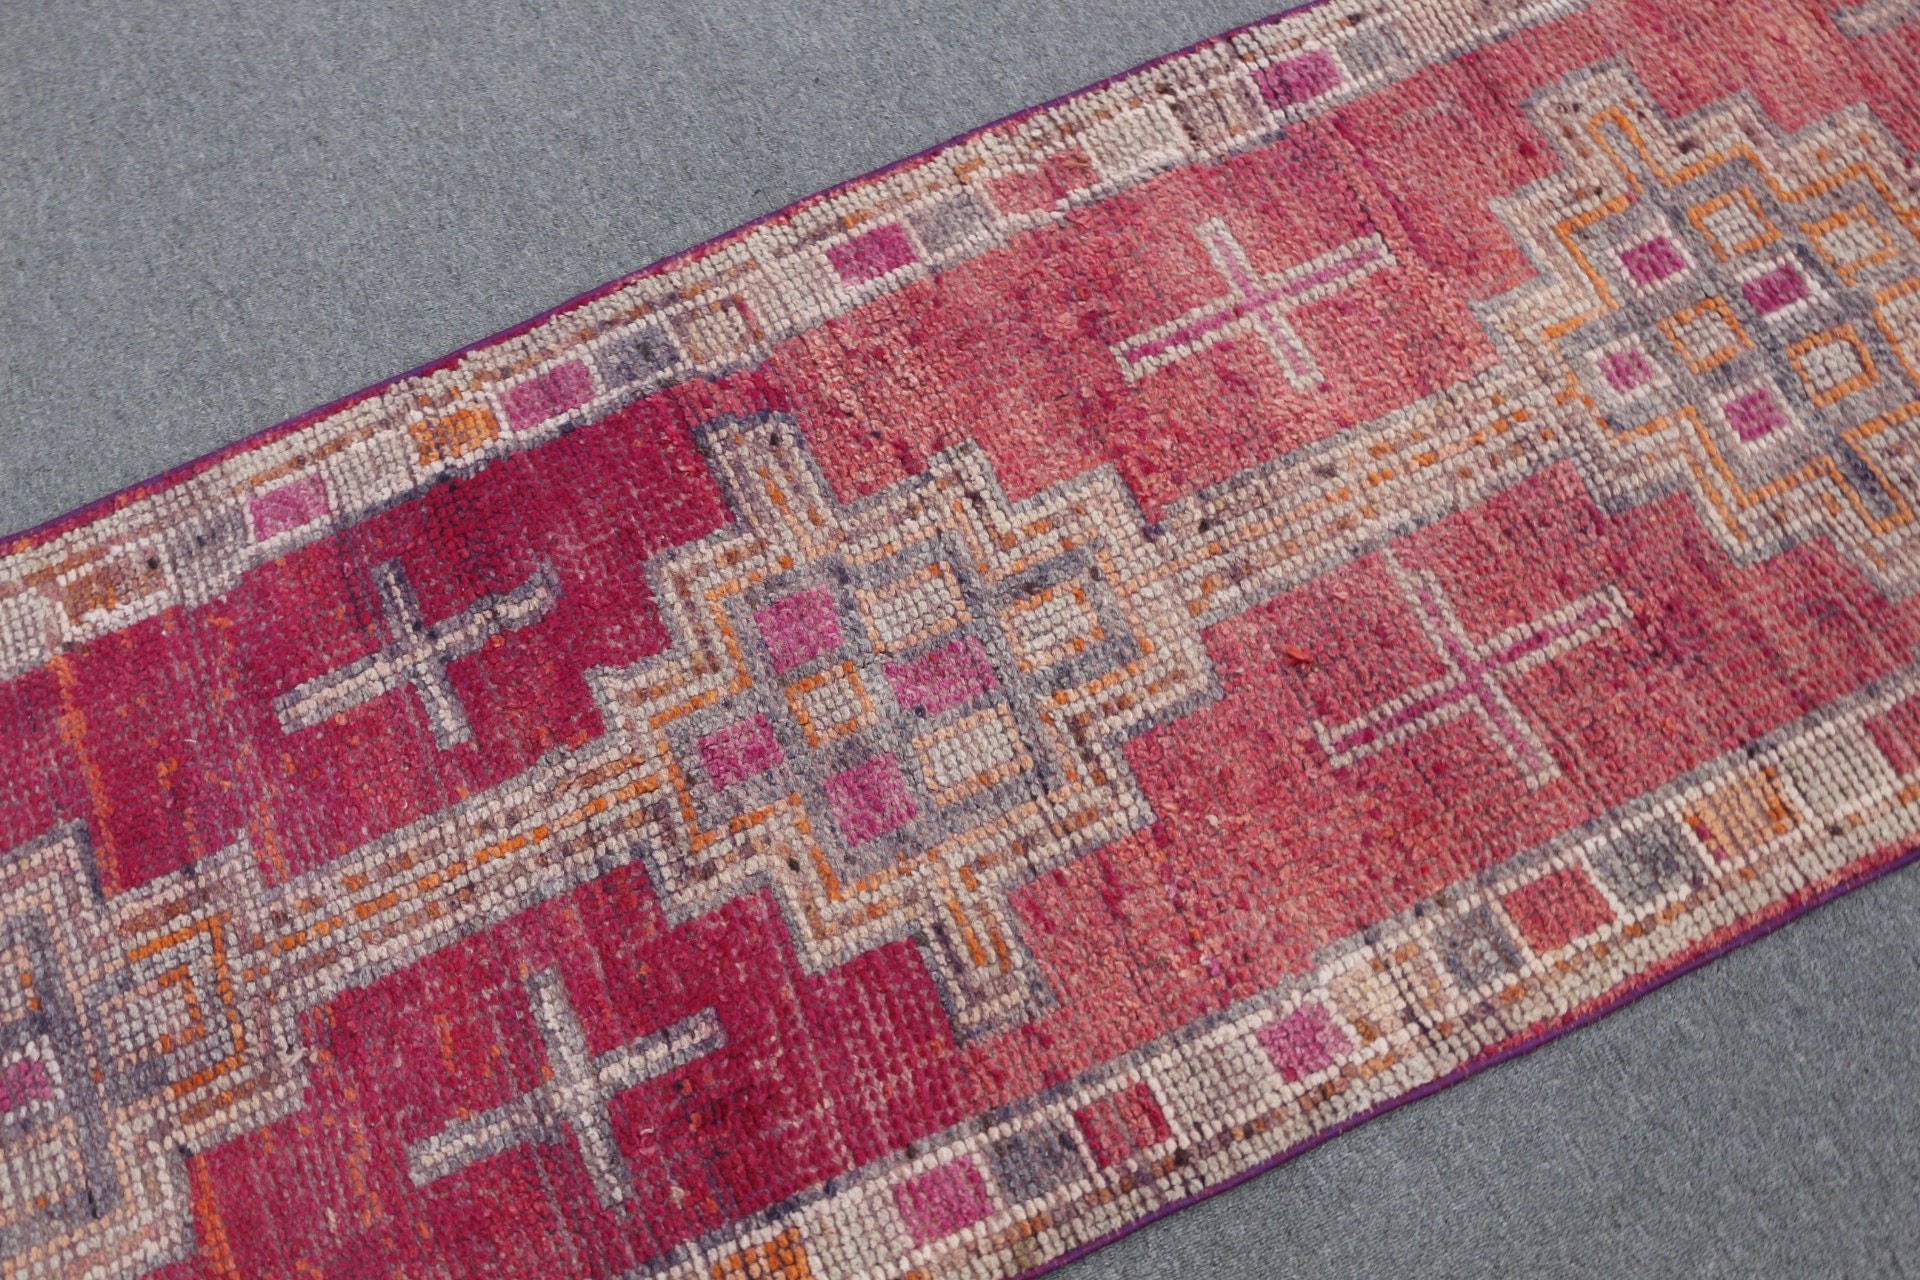 Cool Rug, Rugs for Kitchen, Cute Rug, 2.6x10 ft Runner Rugs, Turkish Rugs, Vintage Rugs, Purple Home Decor Rugs, Kitchen Rug